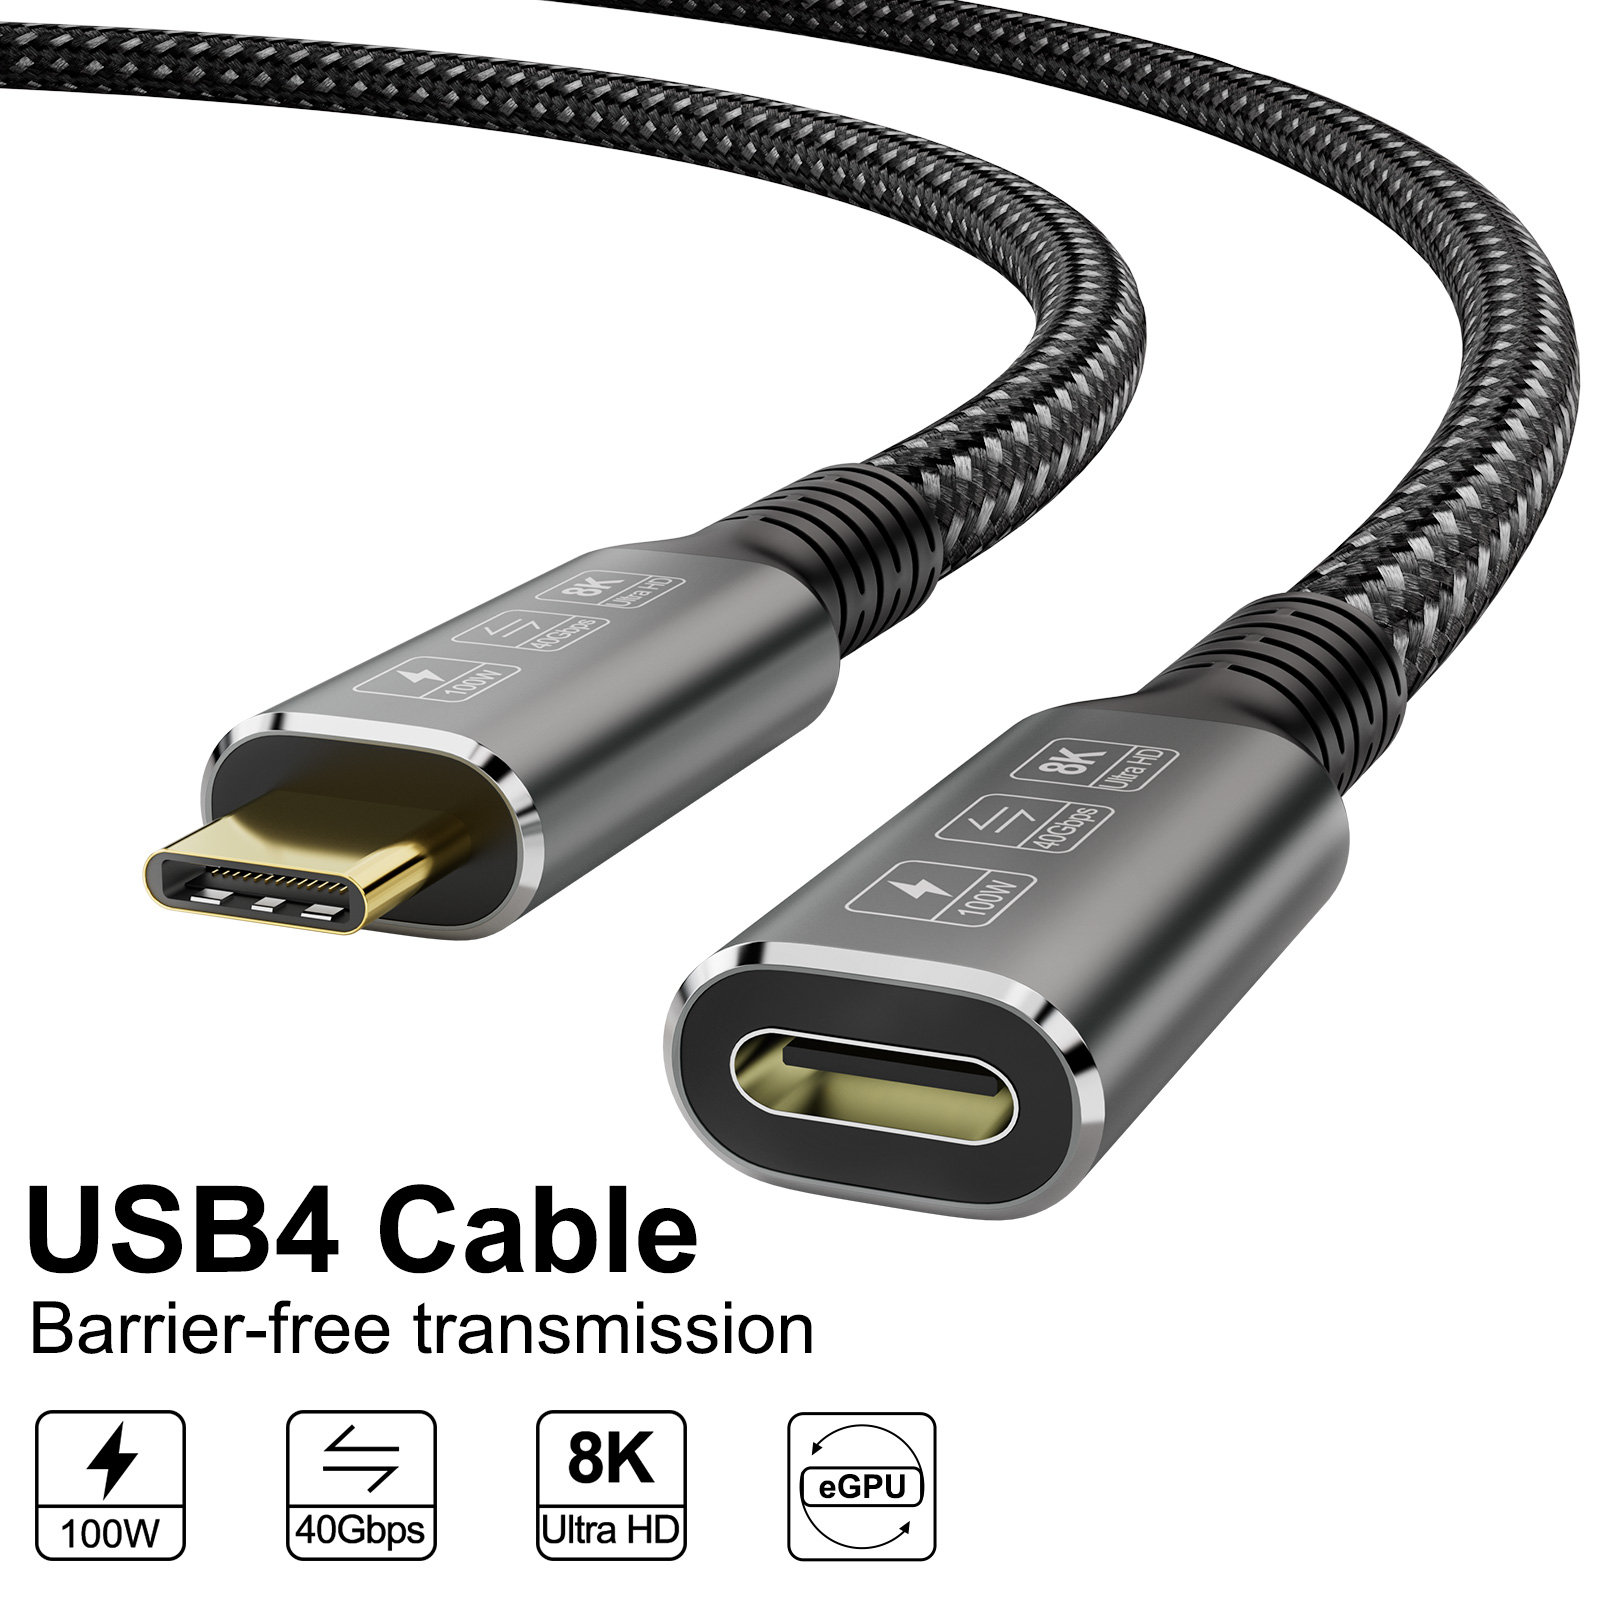 The Best USB 4/Thunderbolt 4 Cable Money Can Buy